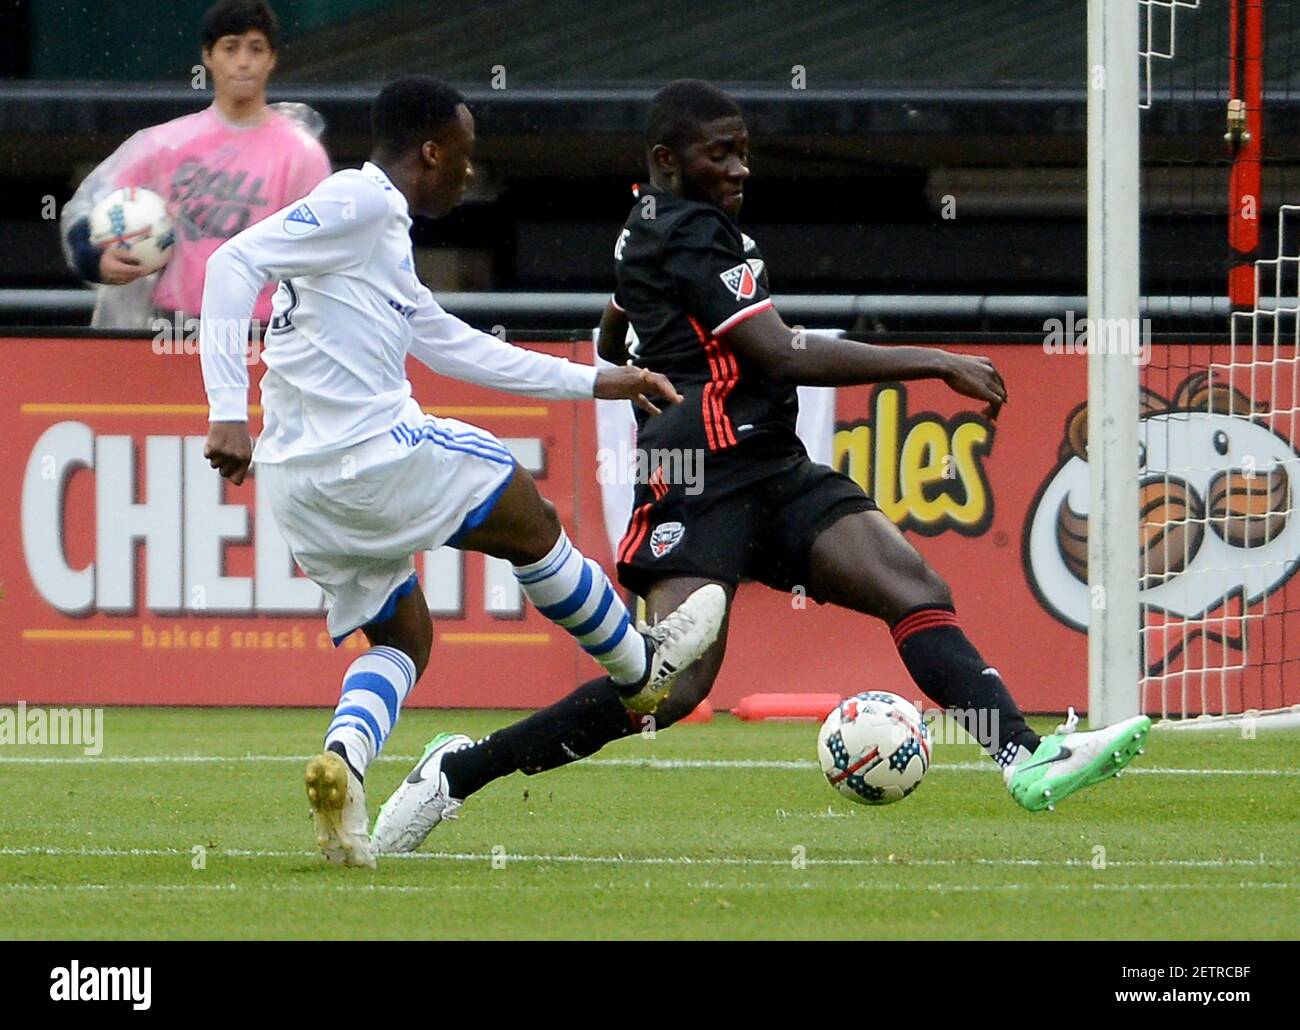 Montreal Impact midfielder Ballou Jean-Yves Tabla (13) fires a goal-scoring  shot past D.C. United defender Kofi Opare (6) in the first half at RFK  Stadium in Washington, D.C., Saturday, May 6, 2017.